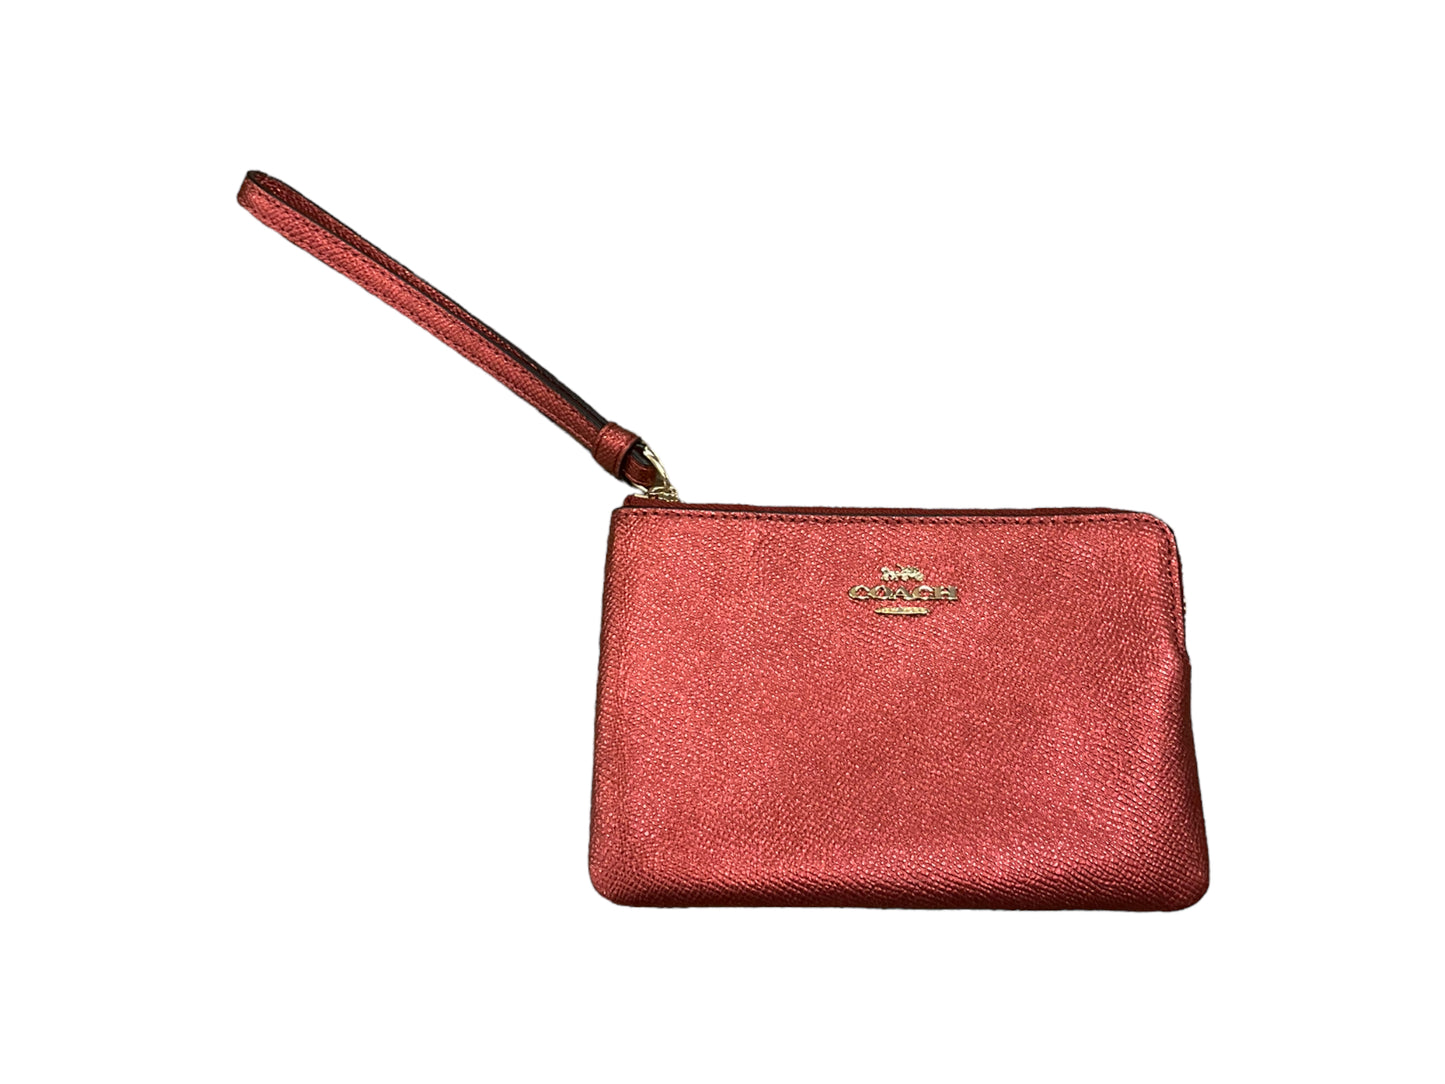 Wristlet Designer By Coach Size: Small